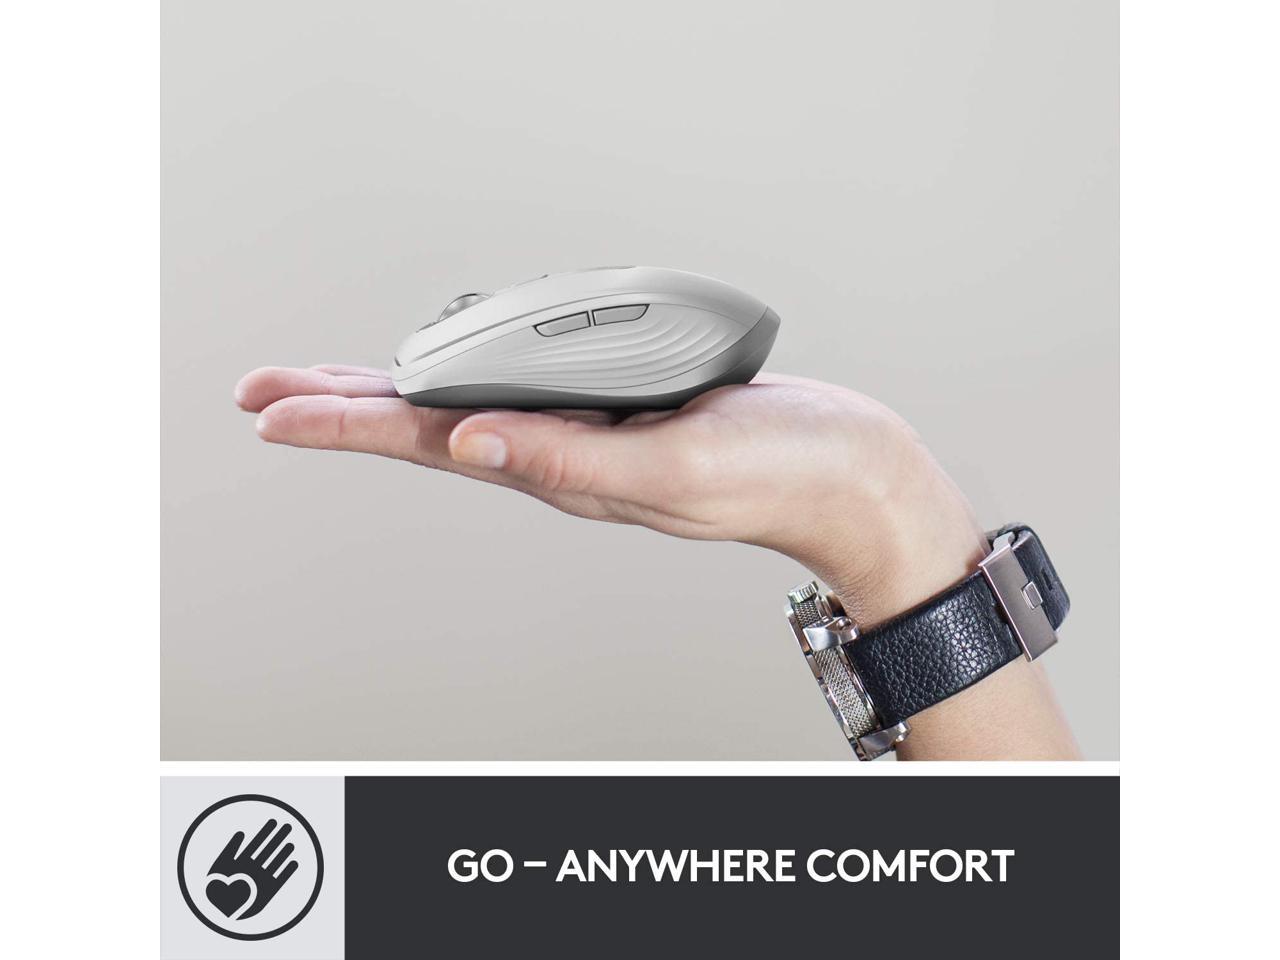 Logitech MX Anywhere 3 Compact Performance Mouse, Wireless, Comfort, Fast Scrolling, Any Surface, Portable, 4000DPI, Customizabl